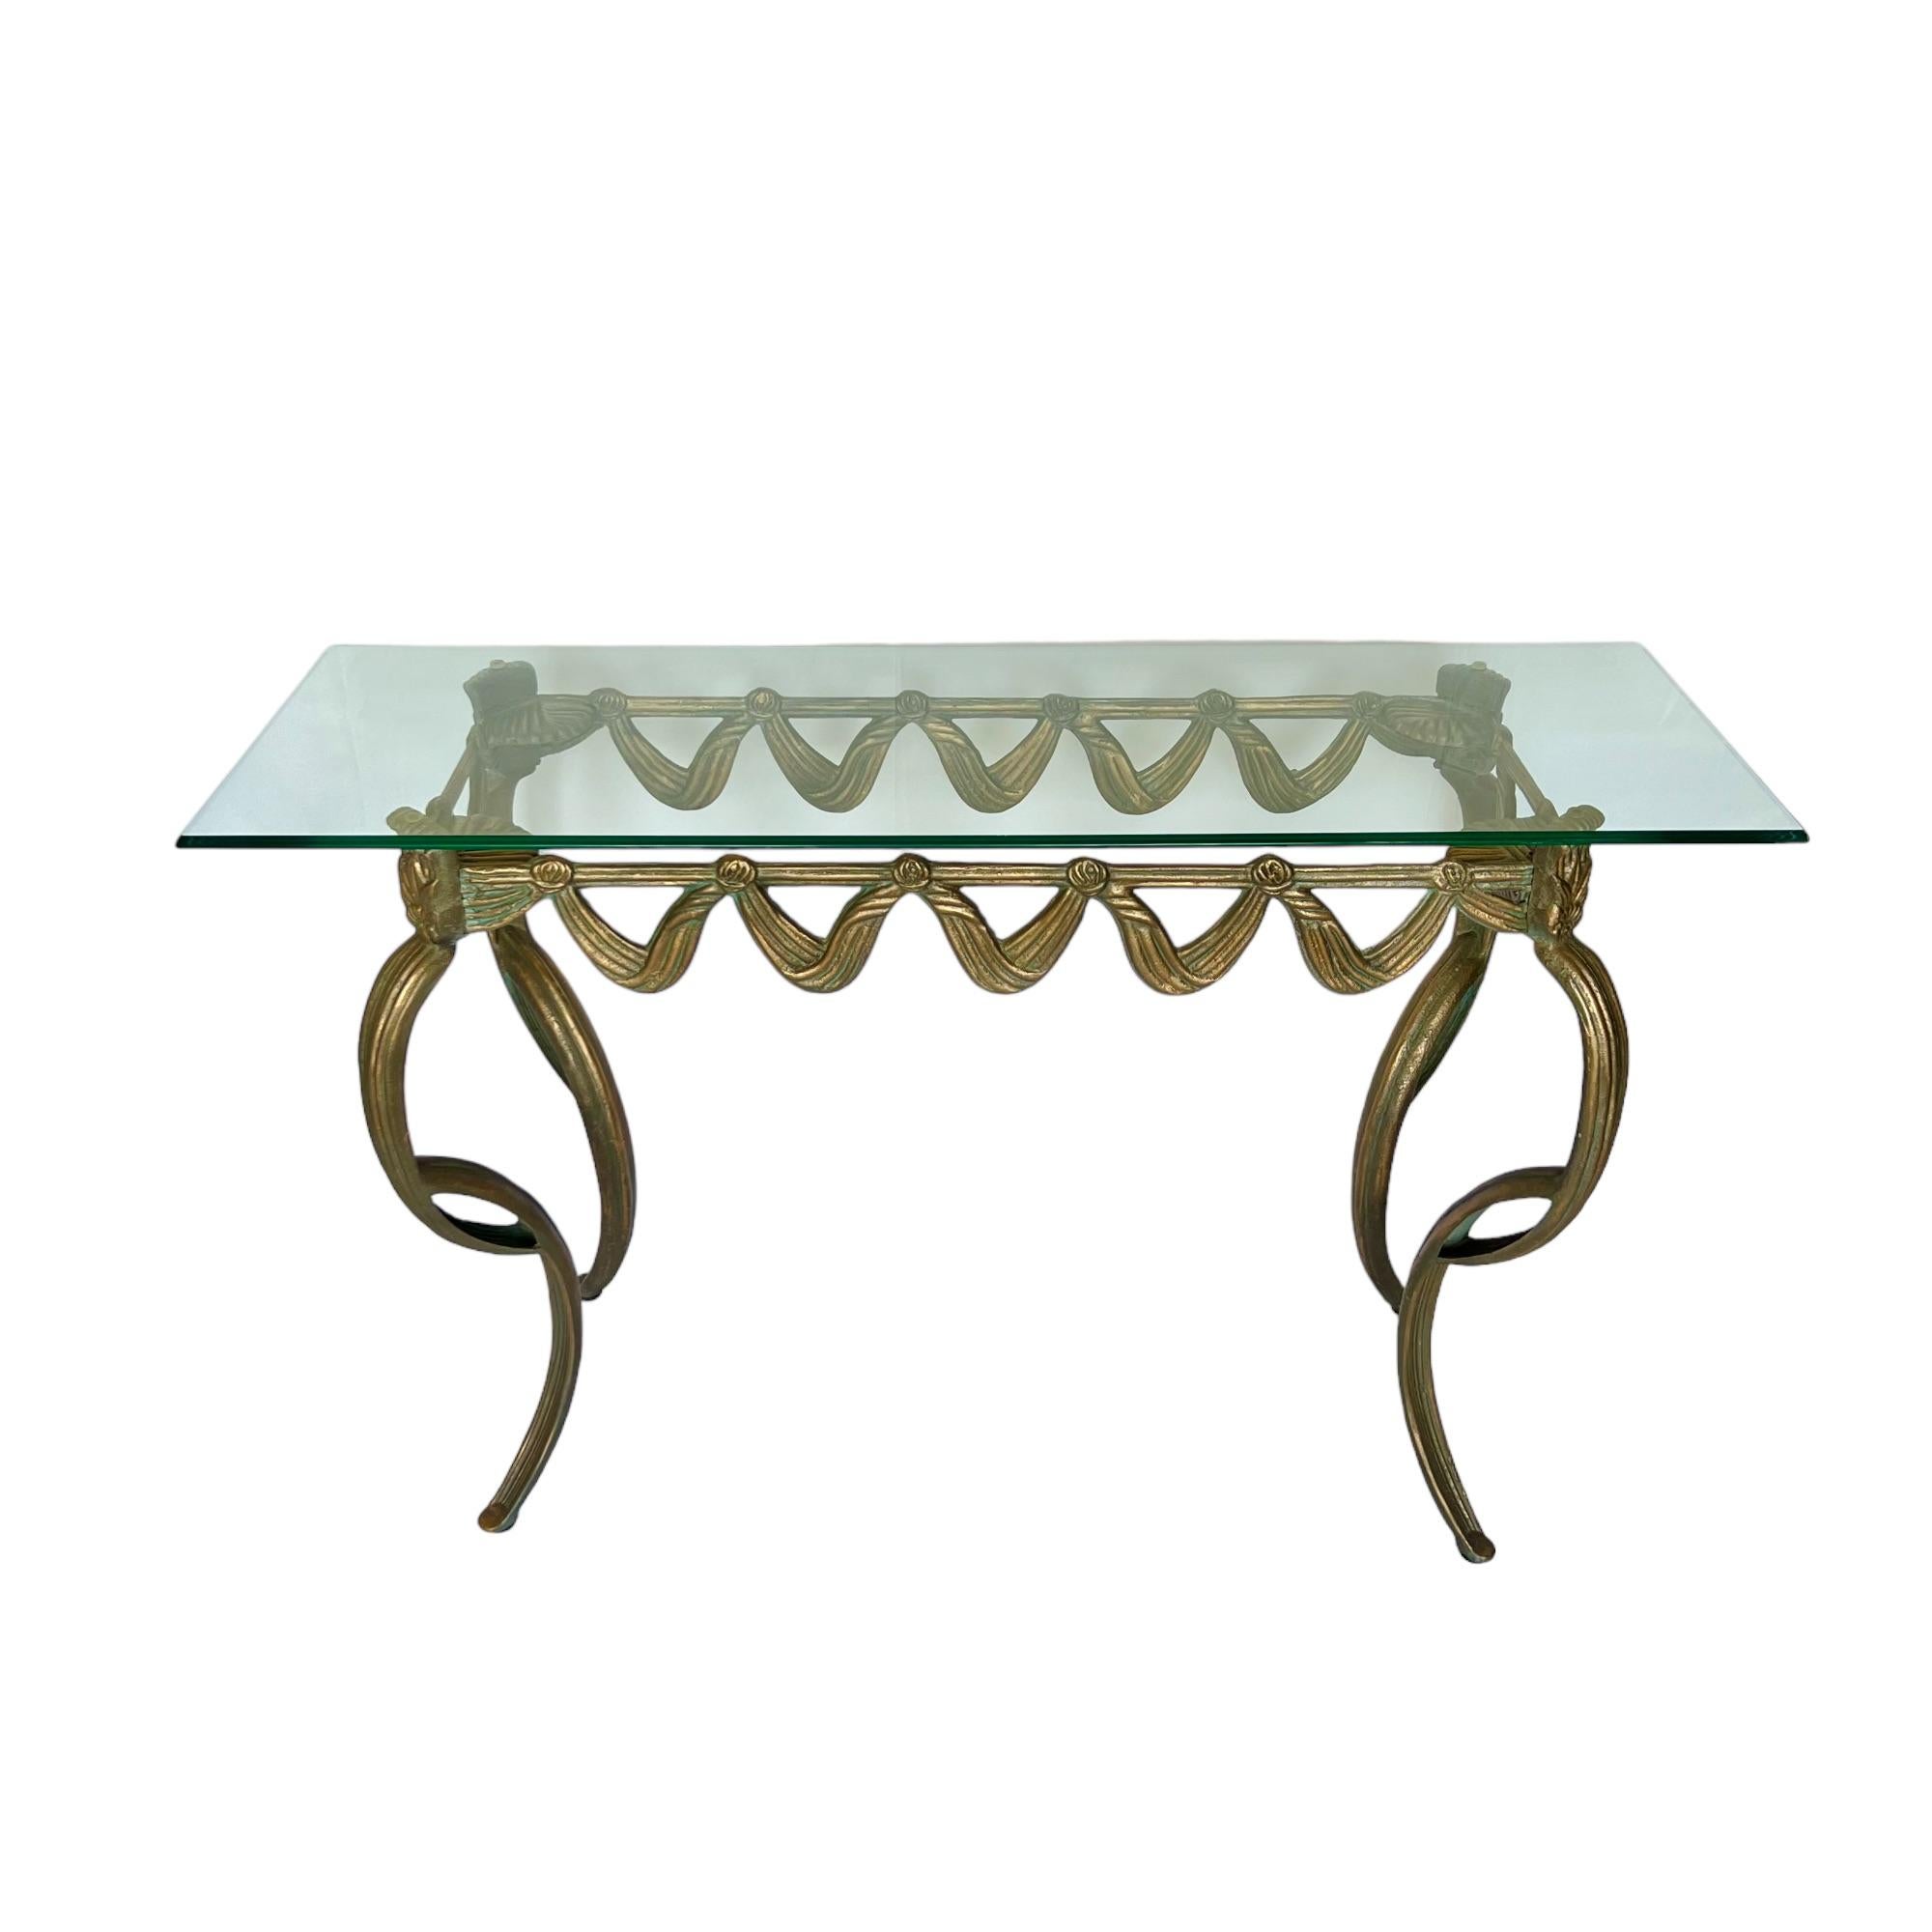 Antique gold and verdigris finishes accentuate the neoclassical design of this gorgeous console, highlighting its swag scalloped edge with rosette detail and long exaggerated cabriole legs. It has a beveled rectangular glass top surface of